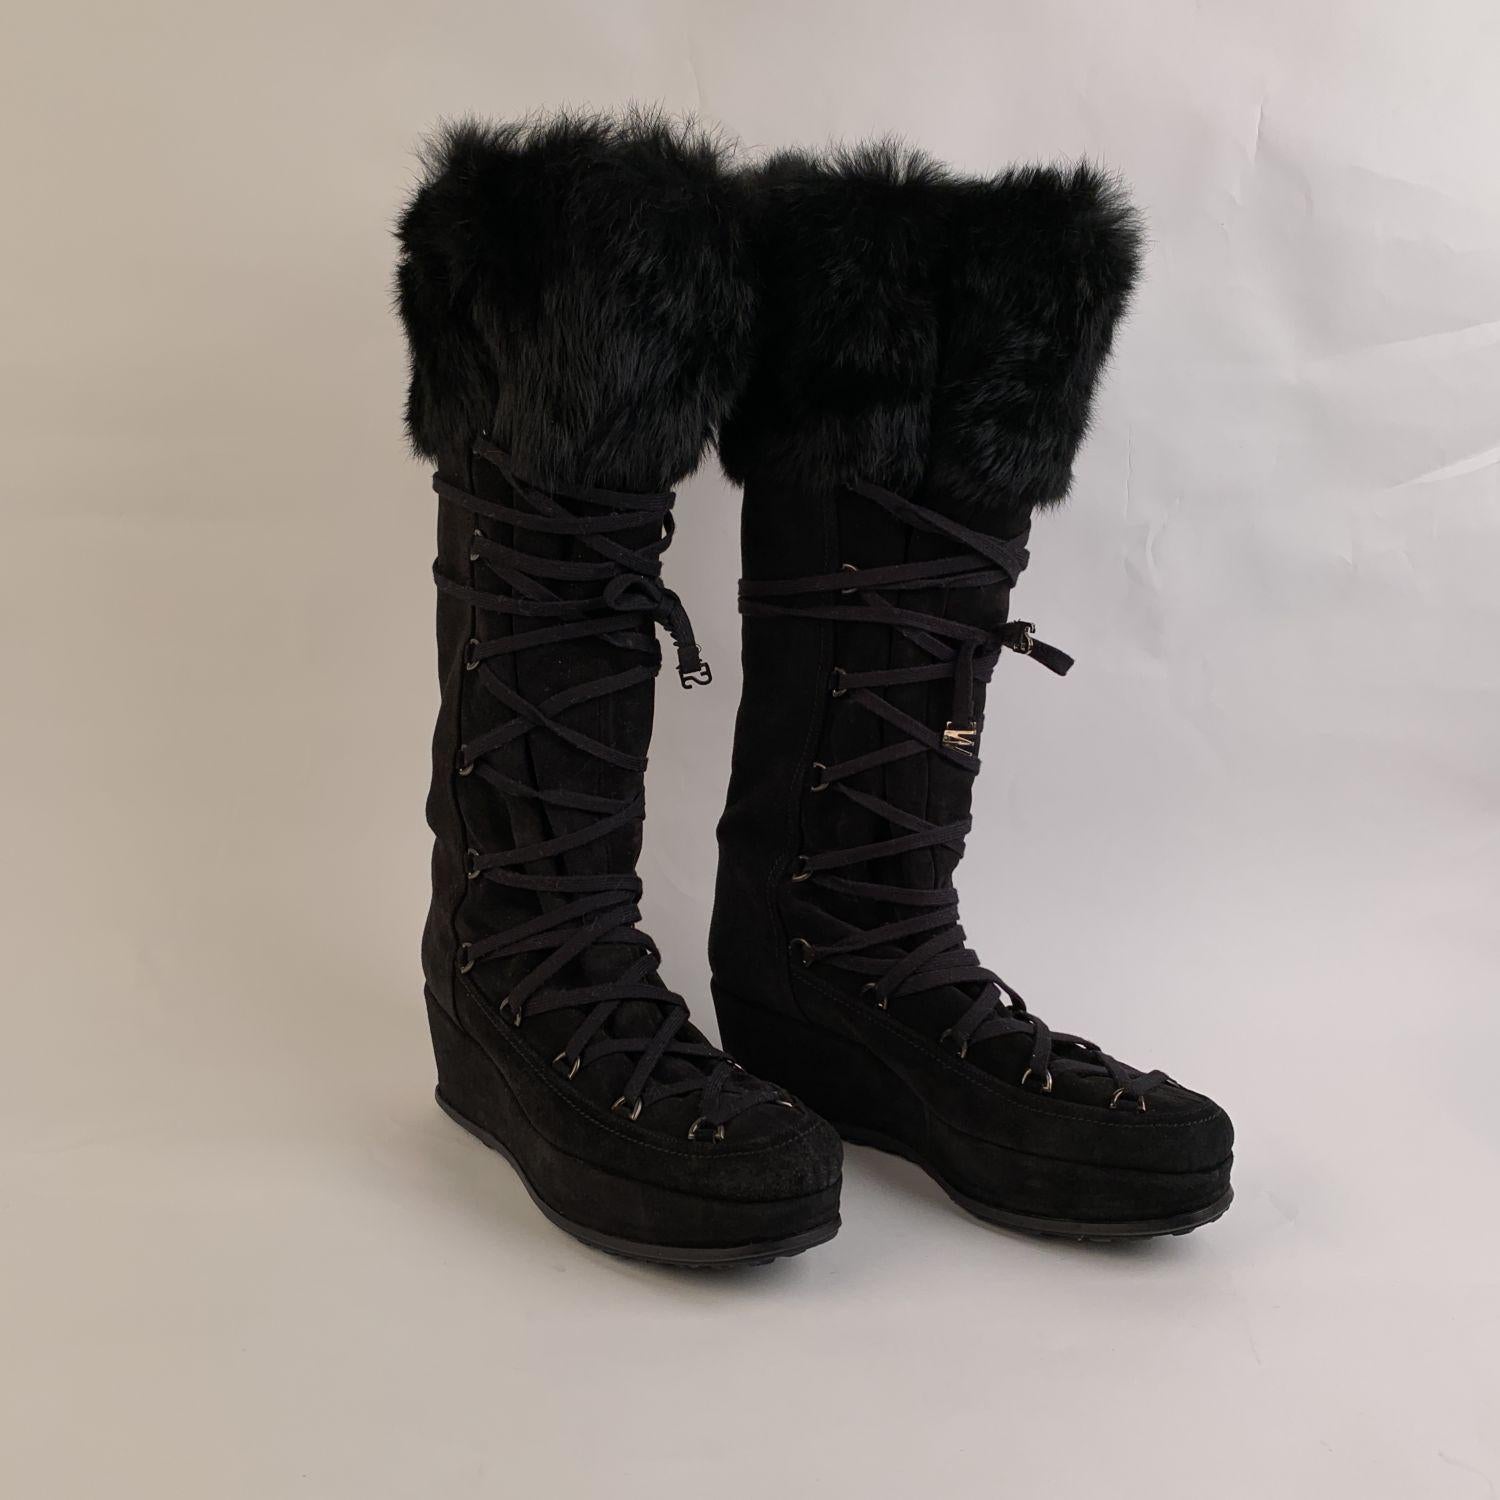 Stuart Weitzman black suede lace up wedge boots. They feature fur trim on the top. Rubber sole. Heels Height: 2.5 inches - 6.4 cm. Shaft height: 16 inches - 40.5 cm. Size: EU 39.5 (The size shown for this item is the size indicated by the designer